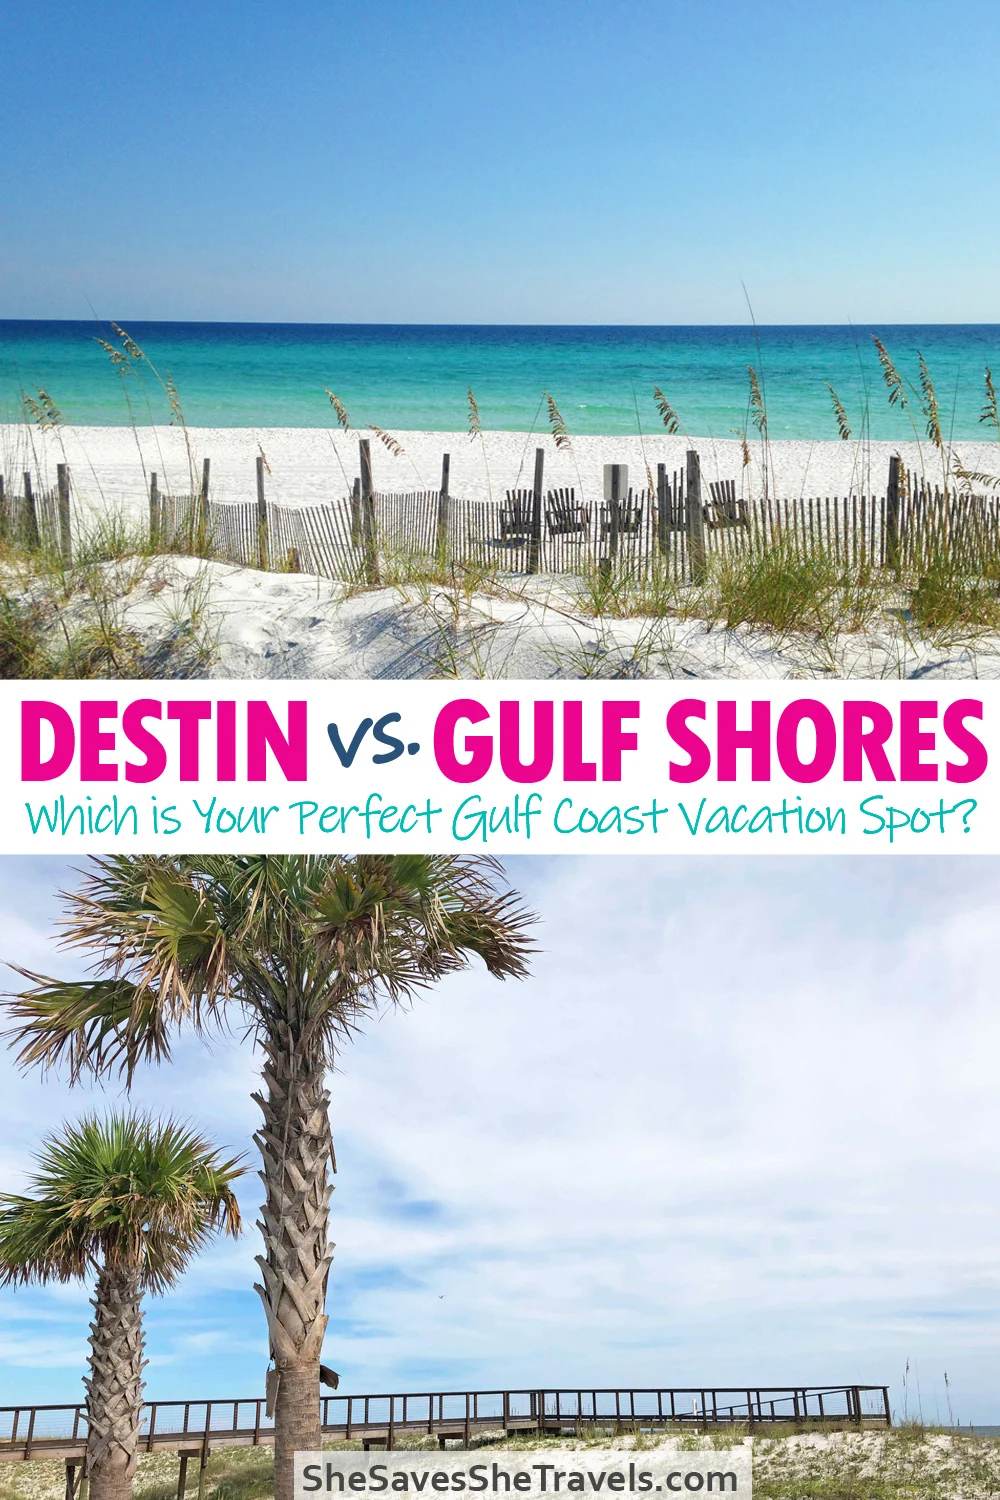 Destin vs Gulf Shores - which is your perfect Gulf Coast vacation spot?